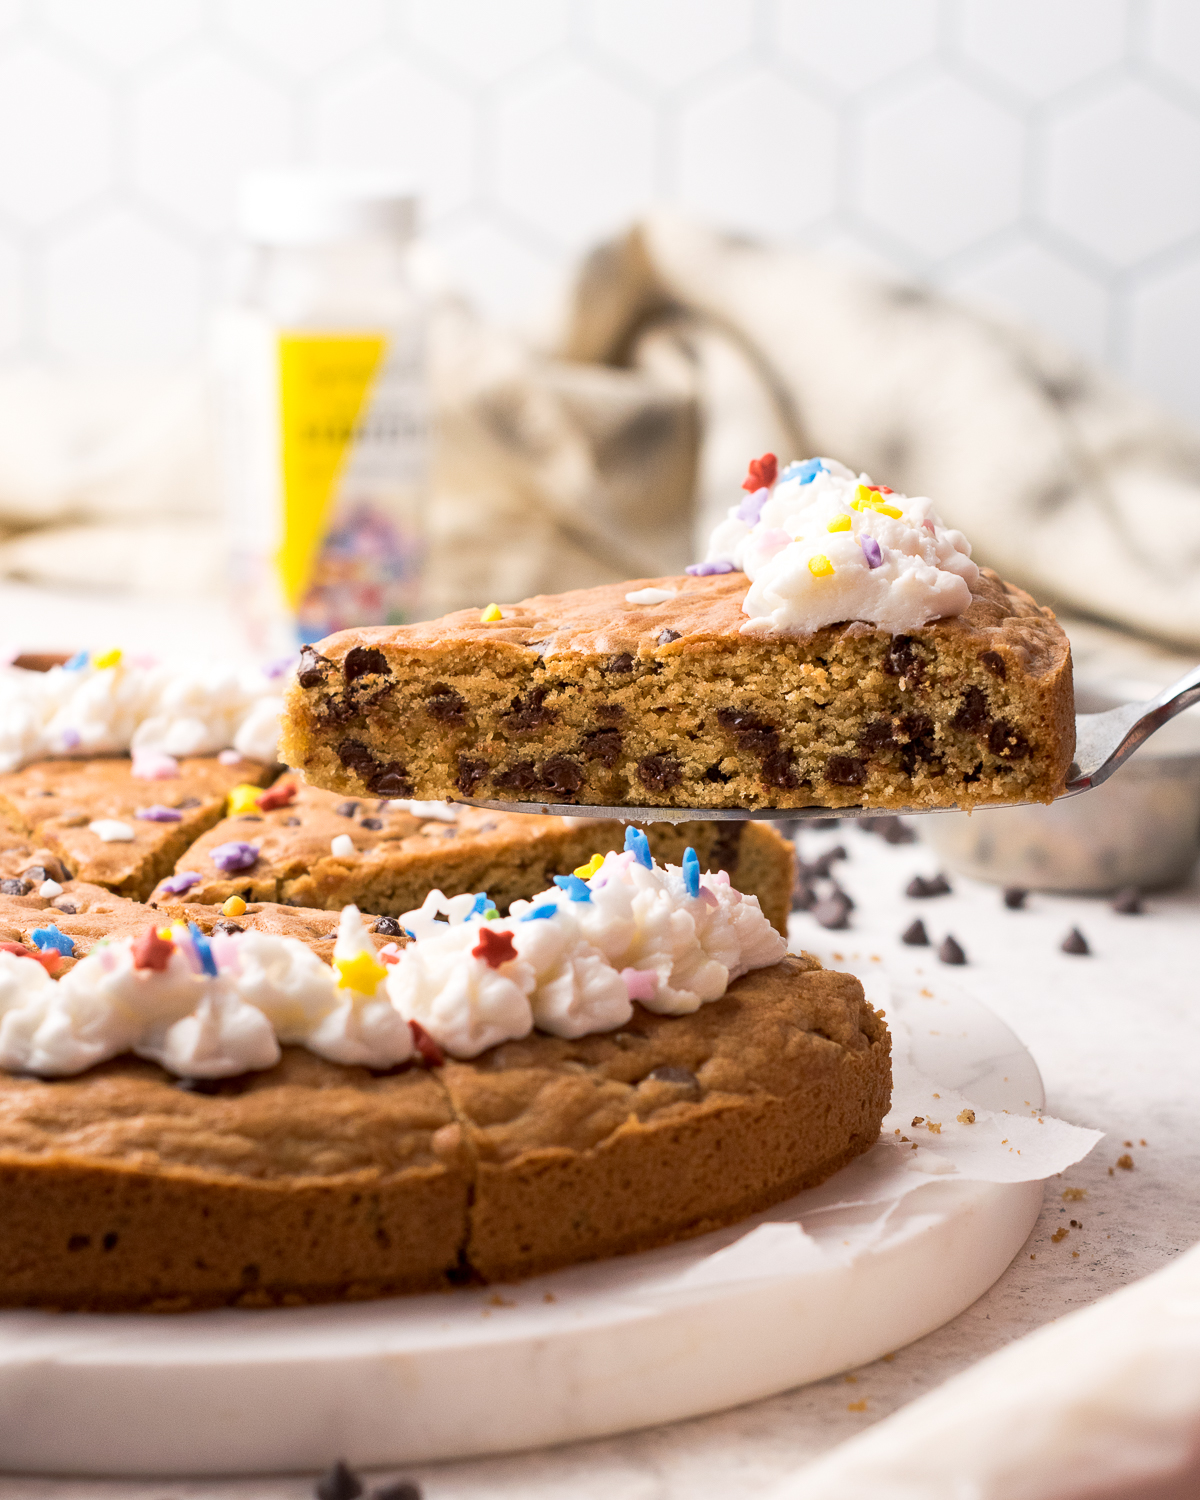 Slice of cookie cake being served.